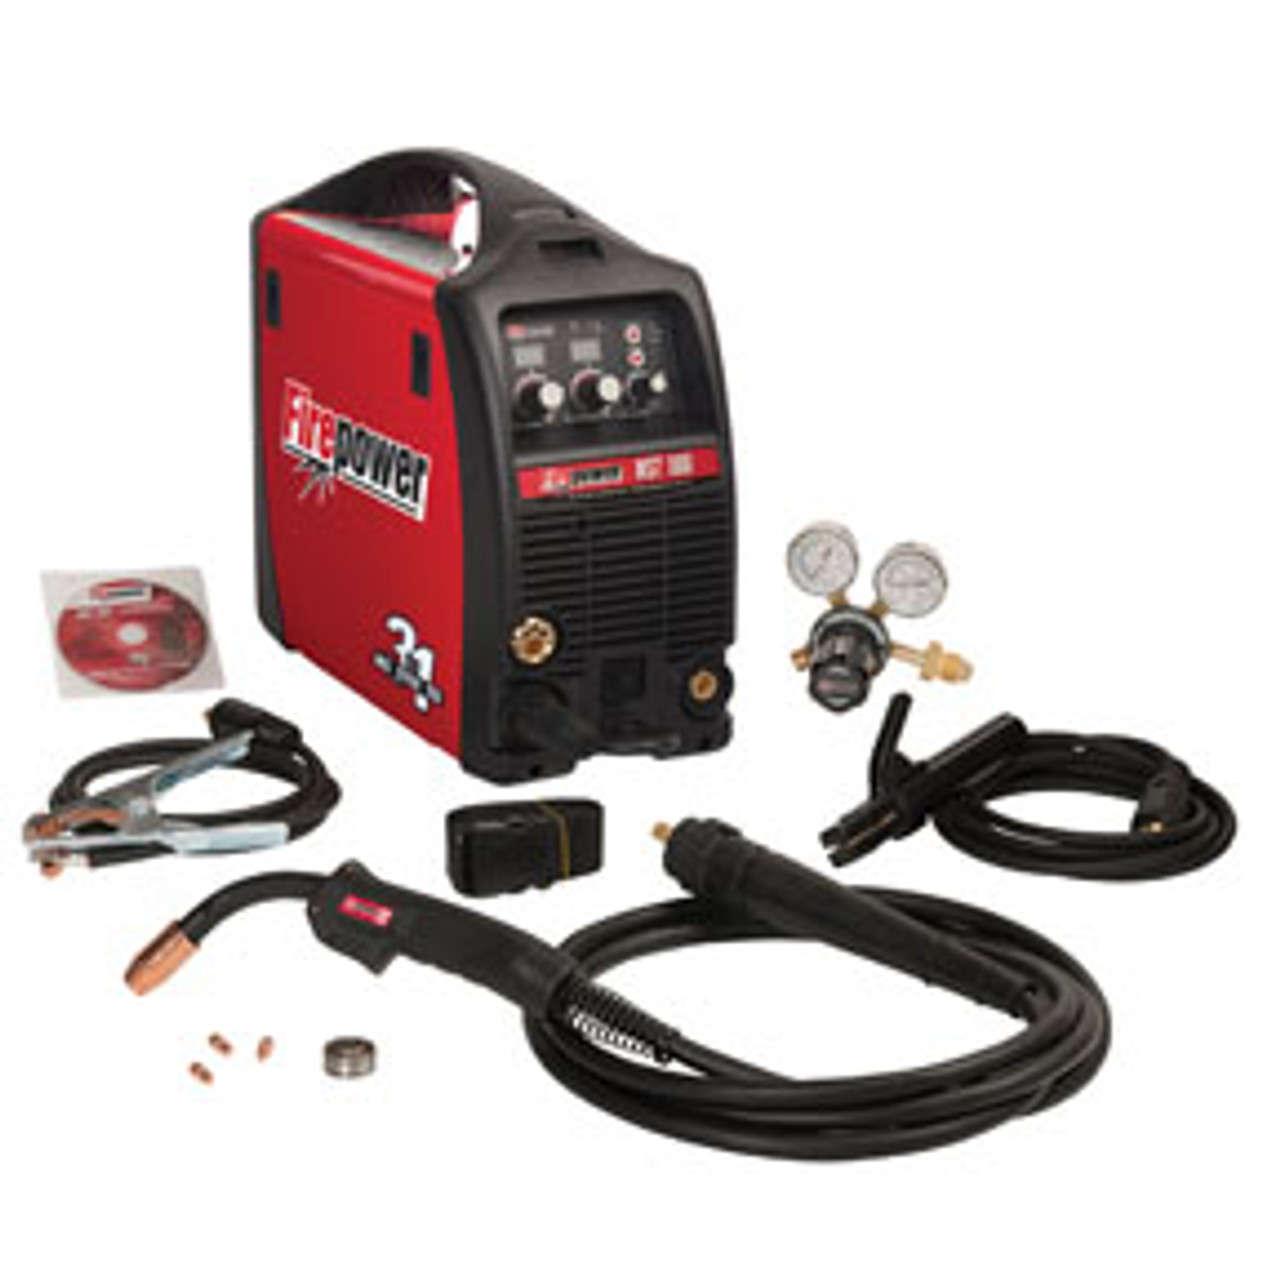 Firepower MST 180i 3-in-1 MIG, Stick, and TIG Welder 1444-0871